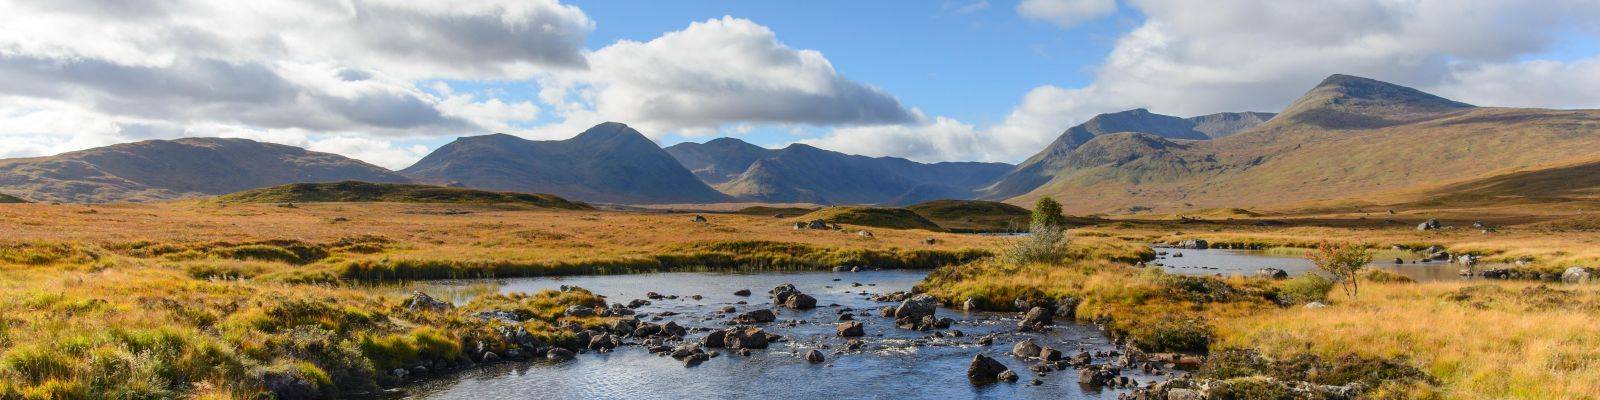 Holiday Cottages In The Scottish Highlands To Rent Self Catering